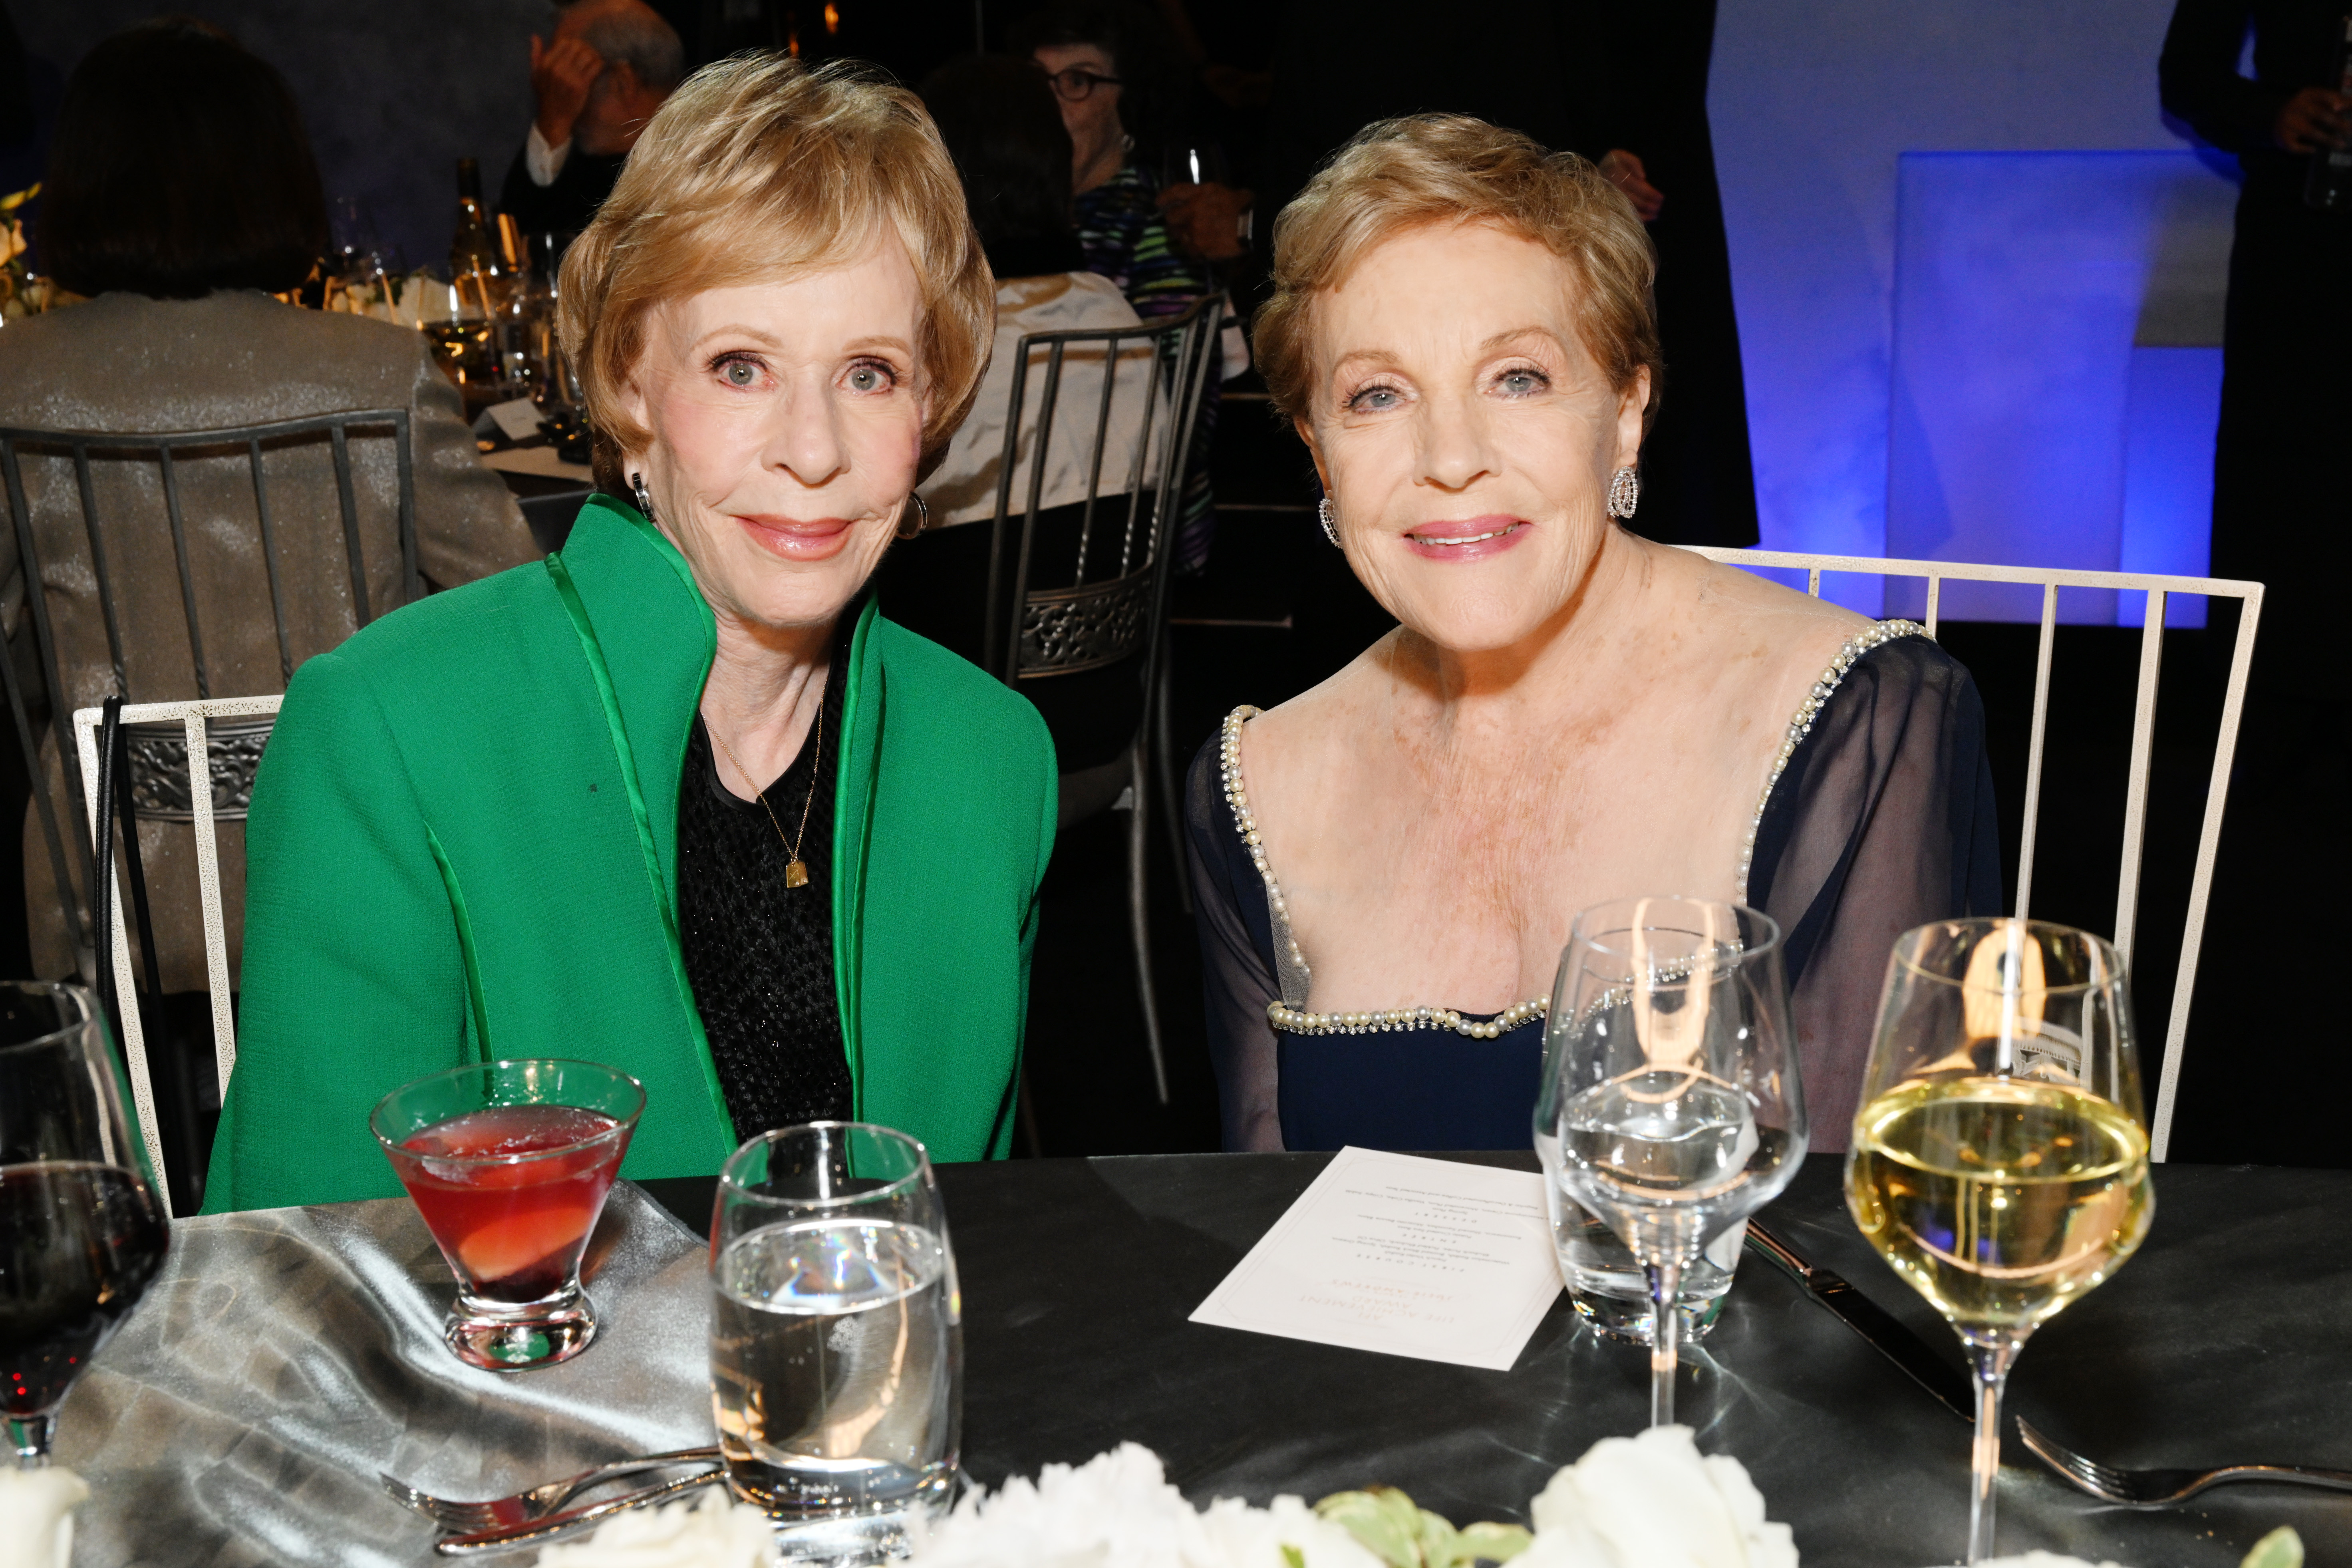 Carol Burnett and Julie Andrews at the AFI Lifetime Achievement Award Gala in Hollywood in June 2022 | Source: Getty Images